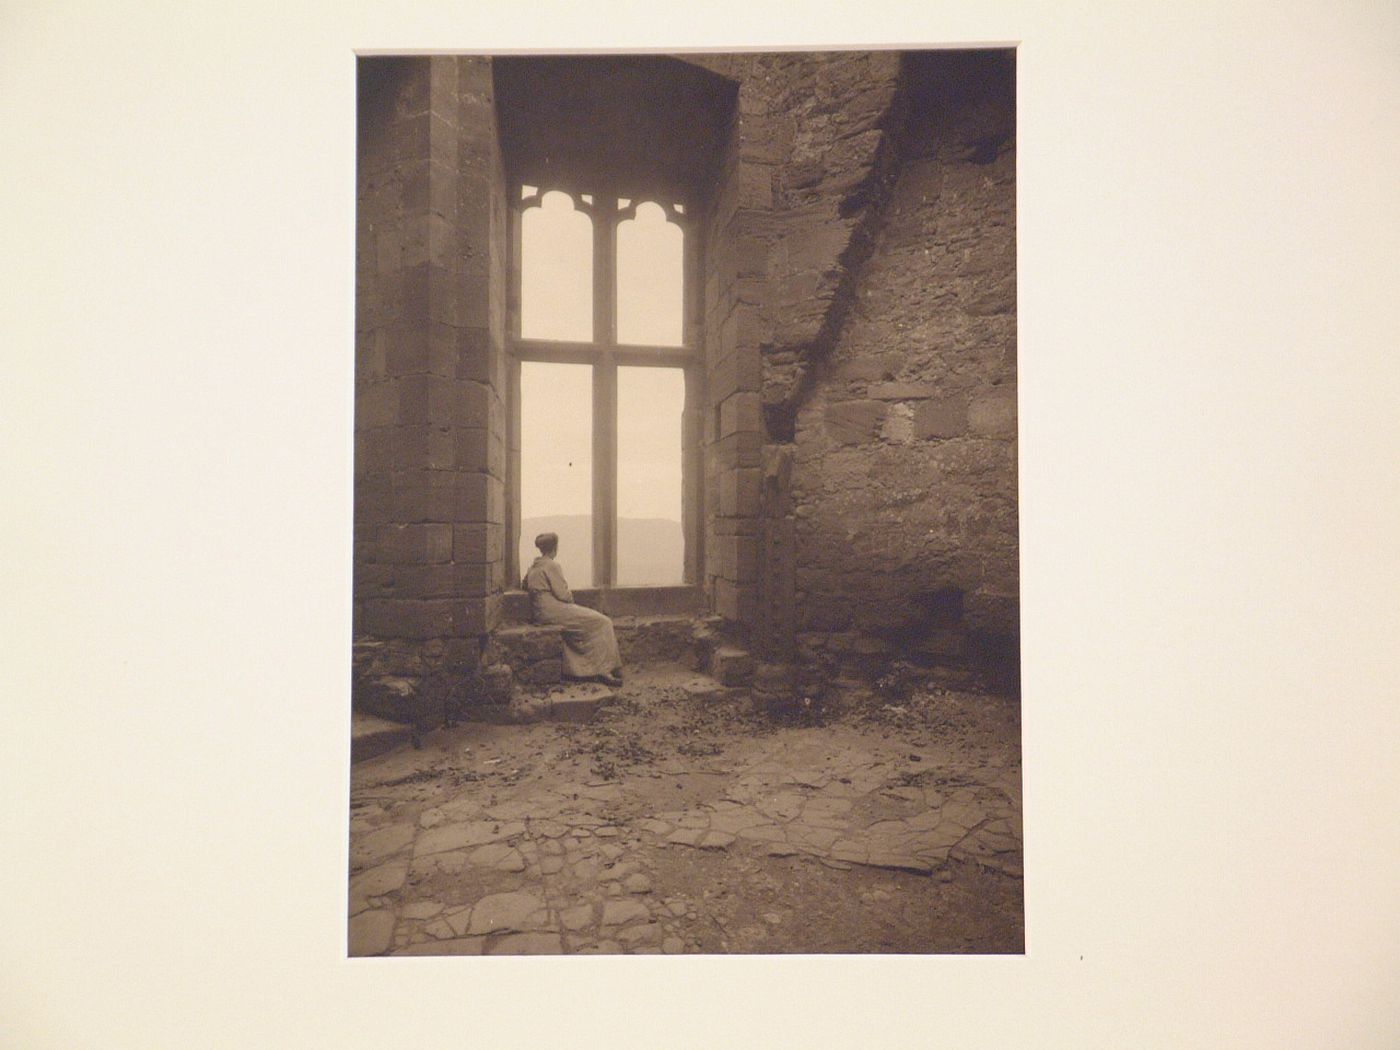 Unidentified ruins, presumably medieval, with woman sitting, in window